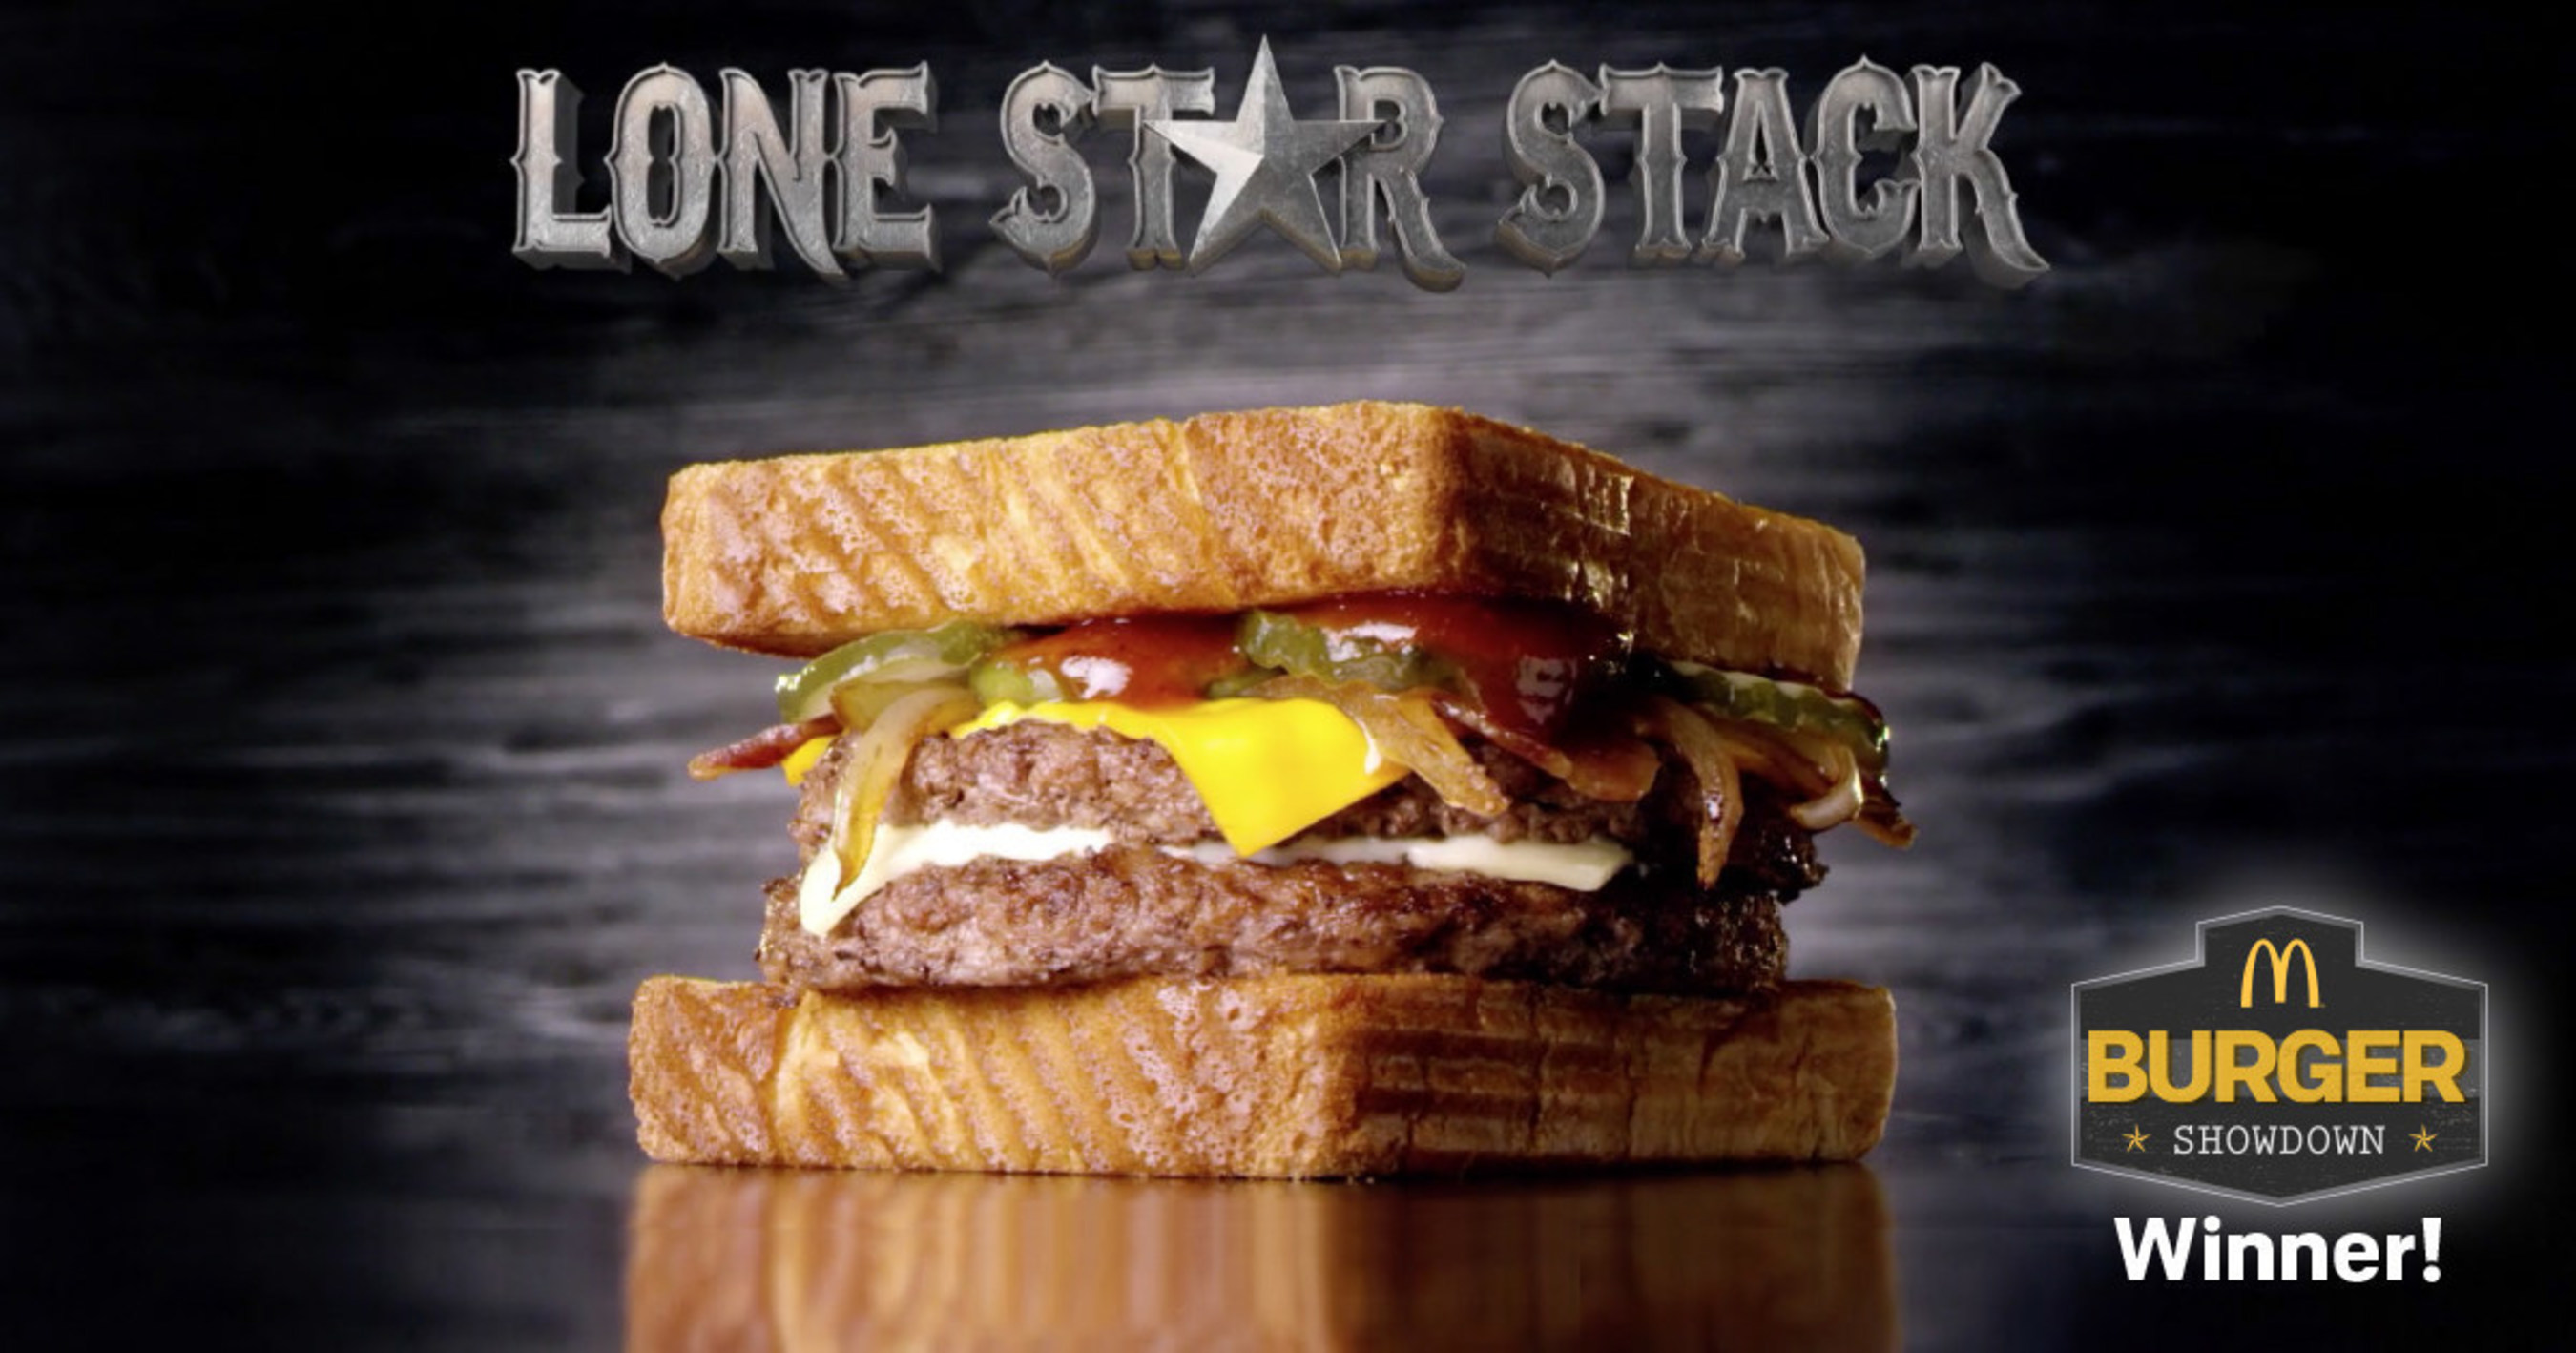 Lone Star Stack